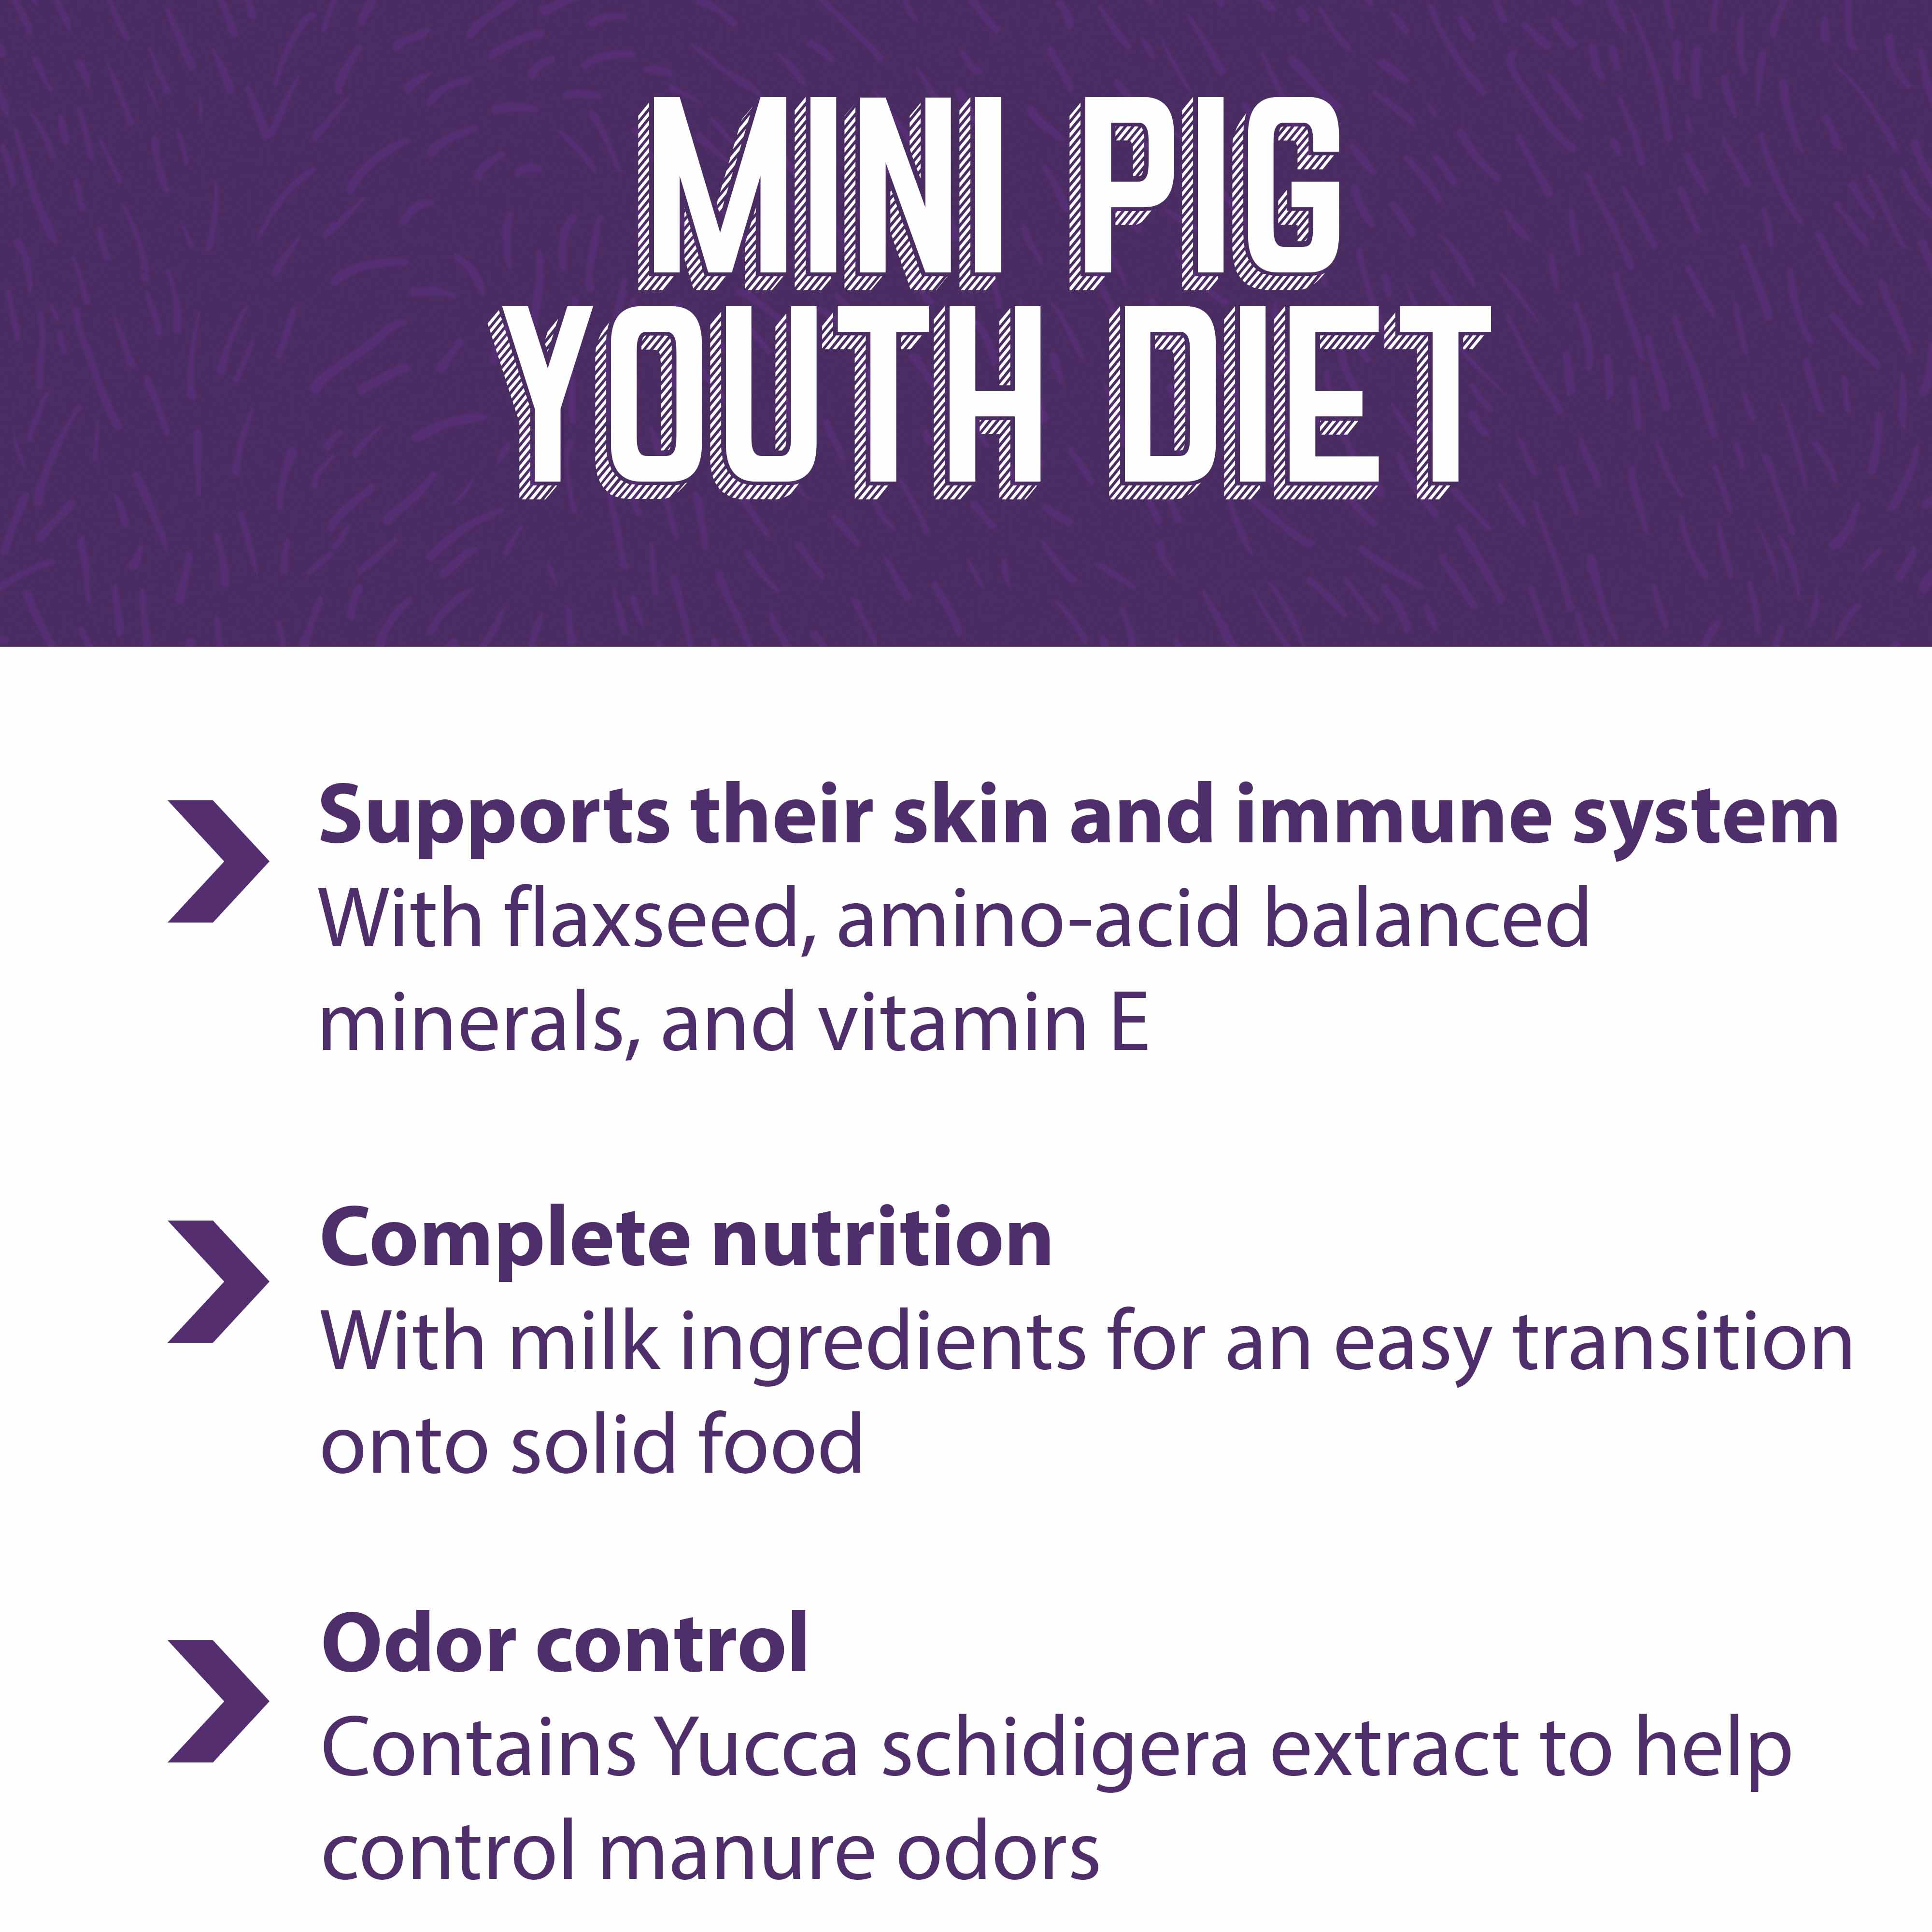 Mini Pig Youth Diet supports their skin and immune system